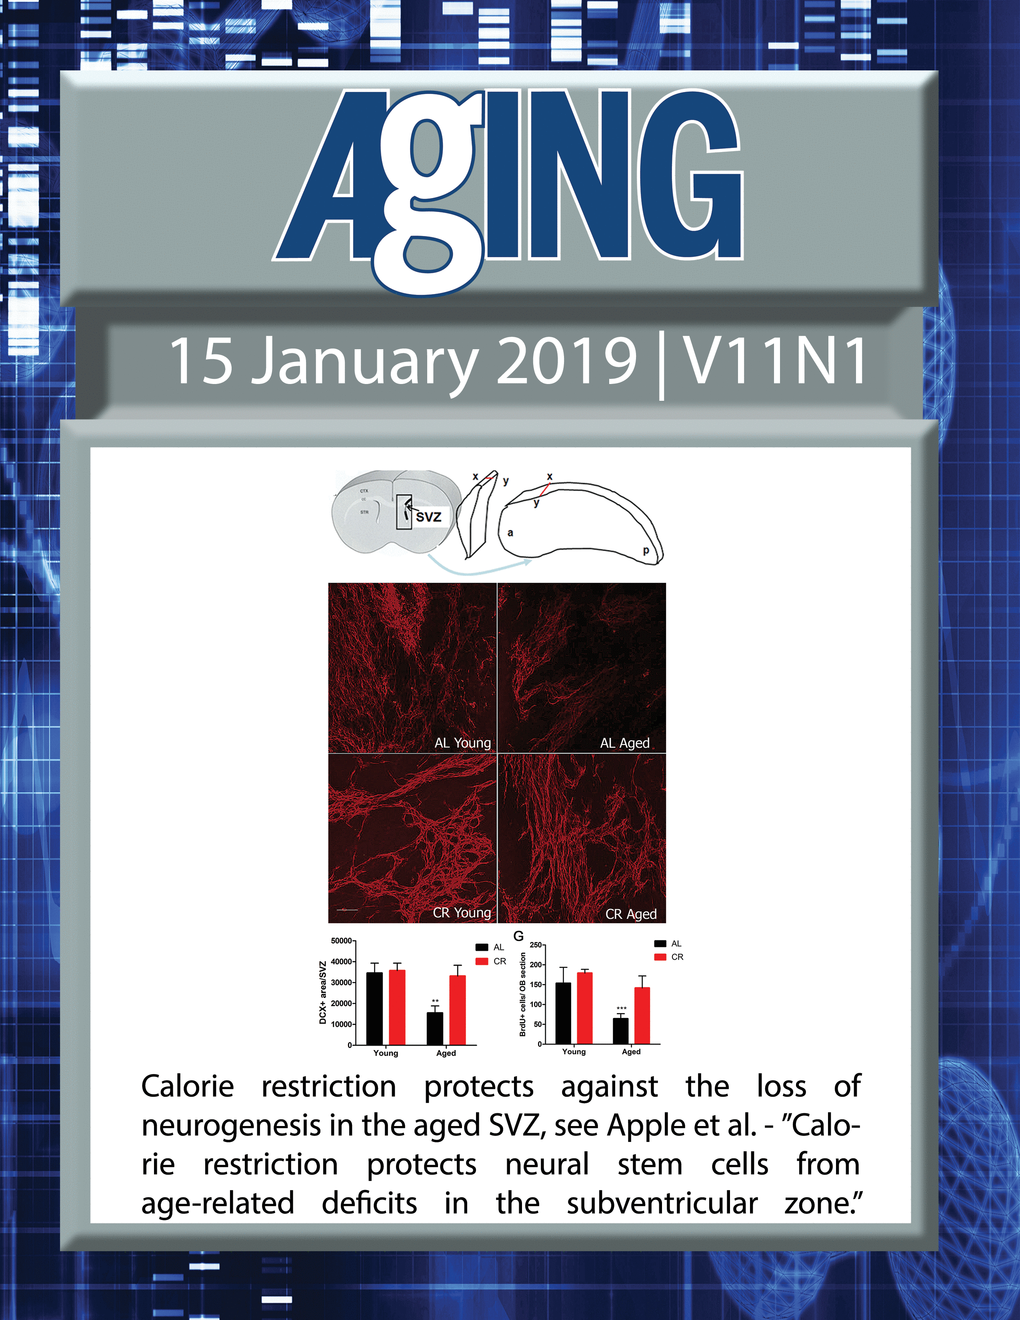 The cover features Figure 2 "Calorie restriction protects against the loss of neurogenesis in the aged SVZ" from Apple et al.